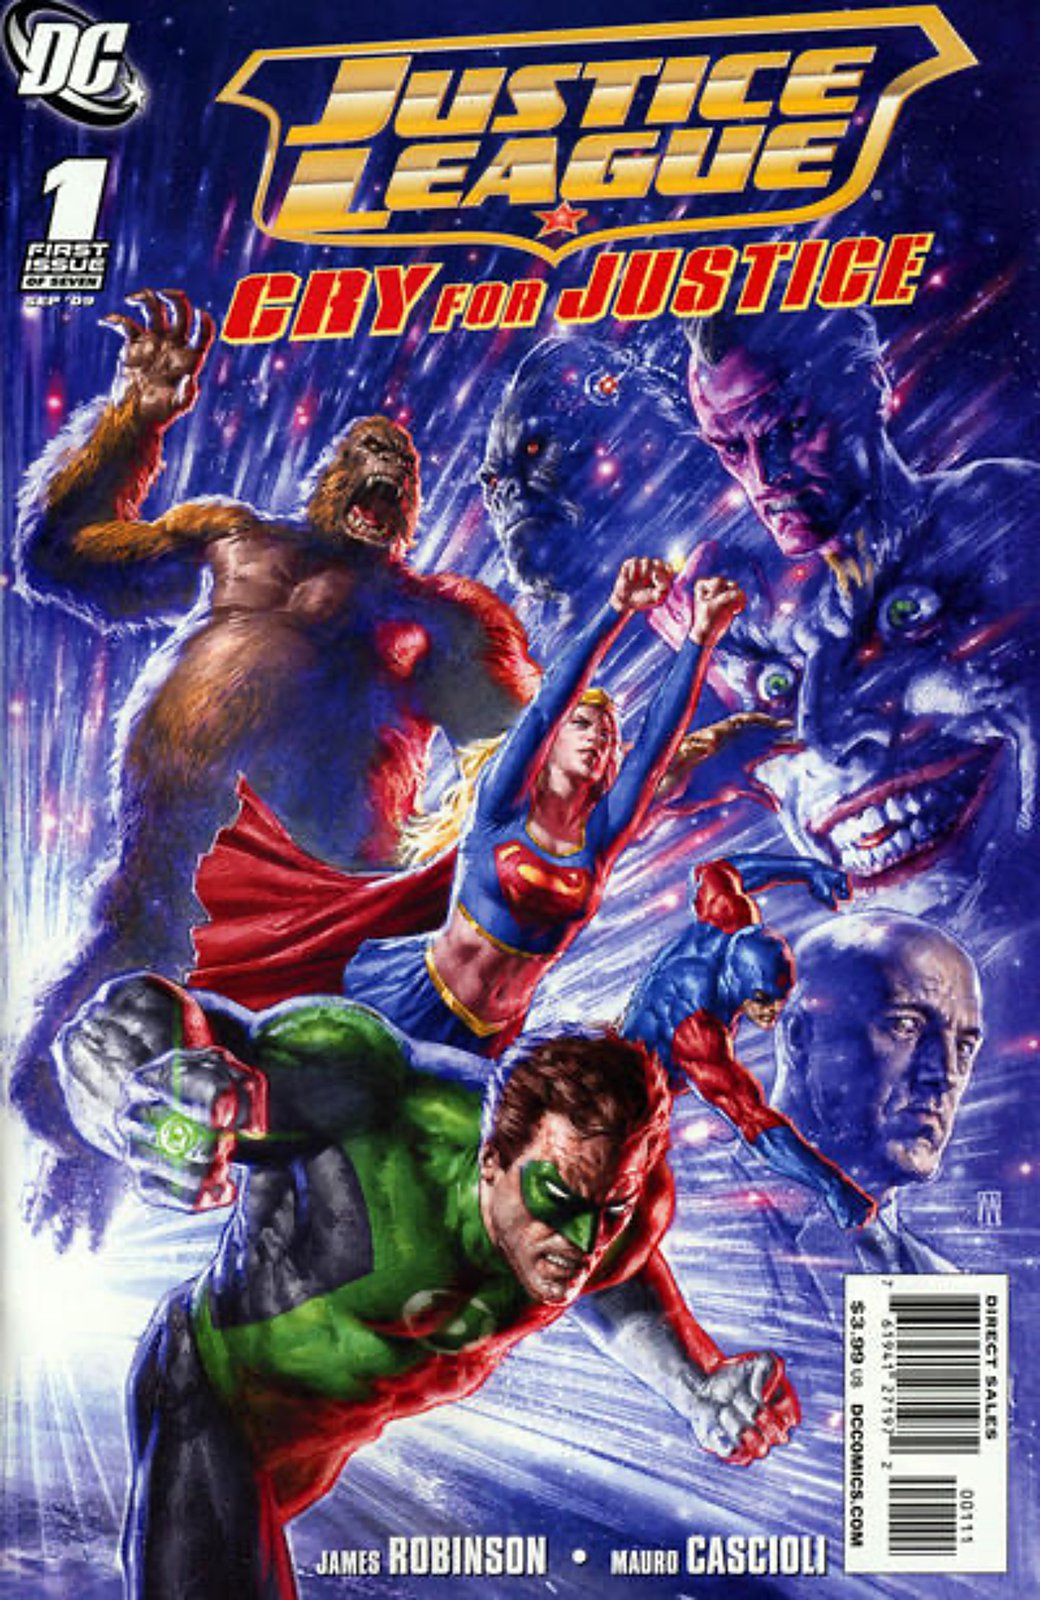 Justice League: Cry for Justice #1B (2009-2010) DC Comics